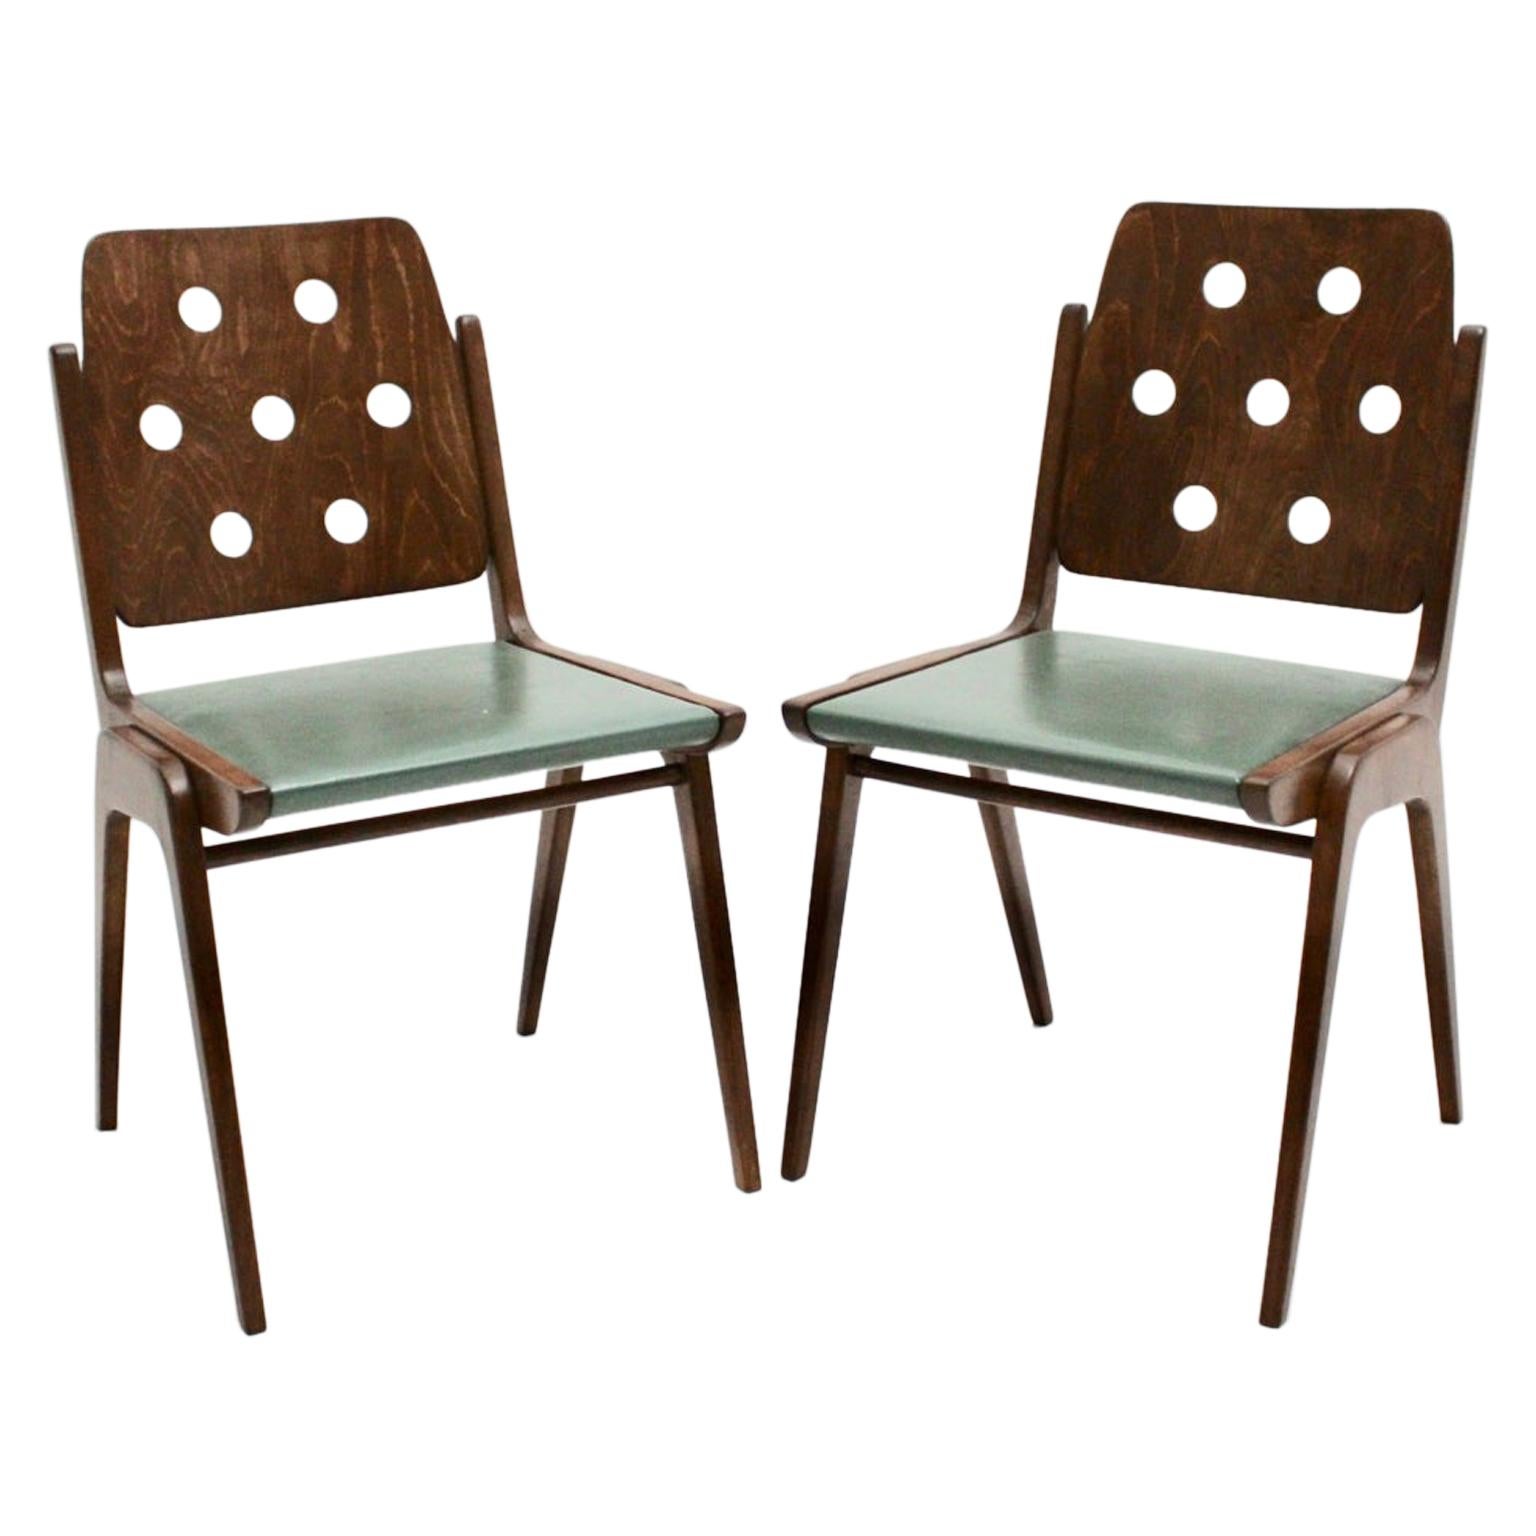 Mid-Century Modern Vintage Brown and Green Dining Chairs by Franz Schuster 1950s